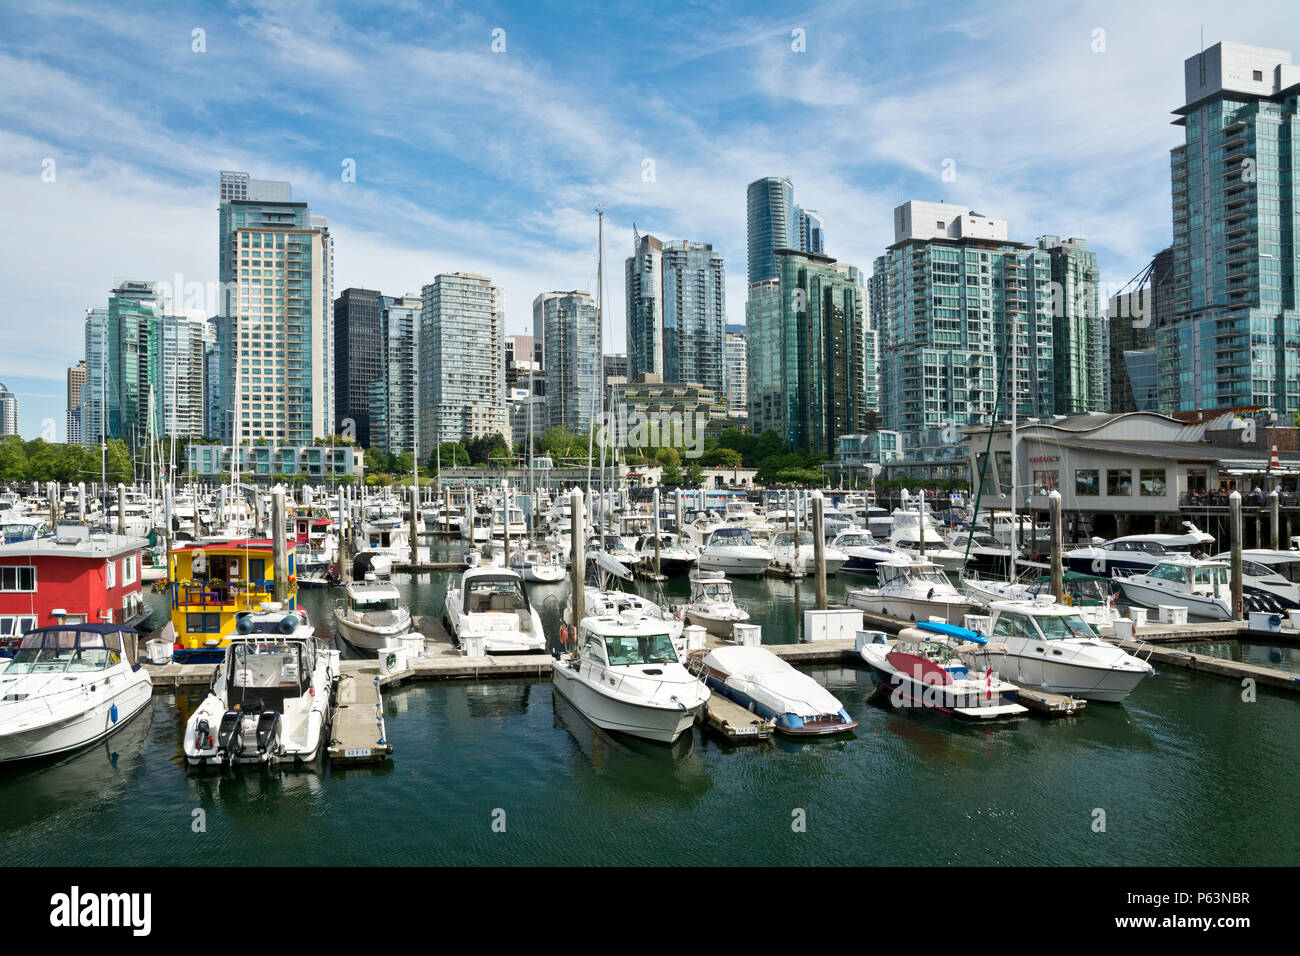 Coal Harbour marina and neighbourhood in downtown Vancouver waterfront. Stock Photo